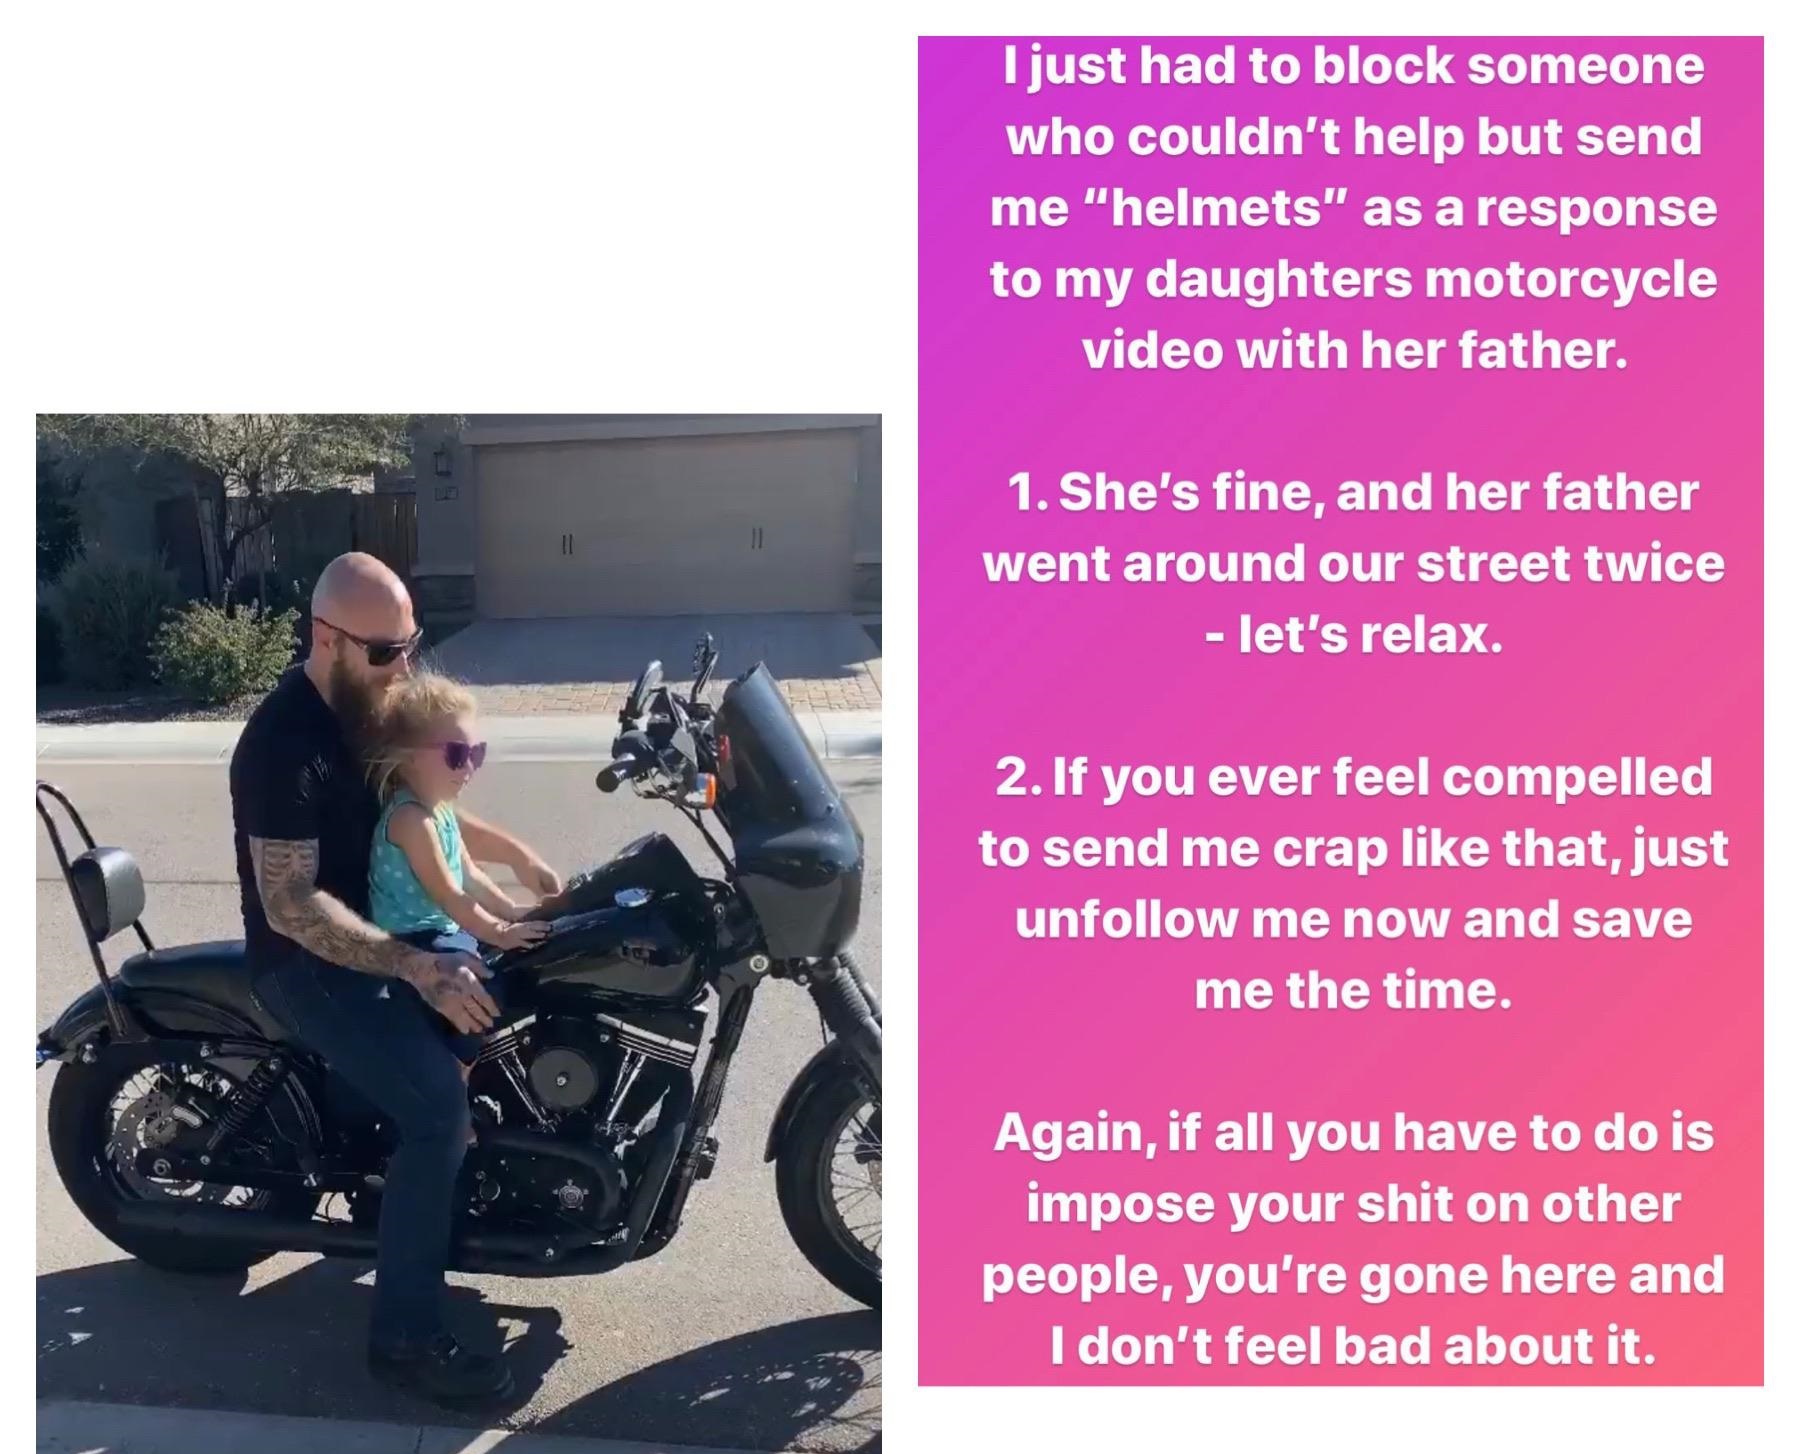 motorcycle - I just had to block someone who couldn't help but send me "helmets" as a response to my daughters motorcycle video with her father. 1. She's fine, and her father went around our street twice let's relax. 2. If you ever feel compelled to send 